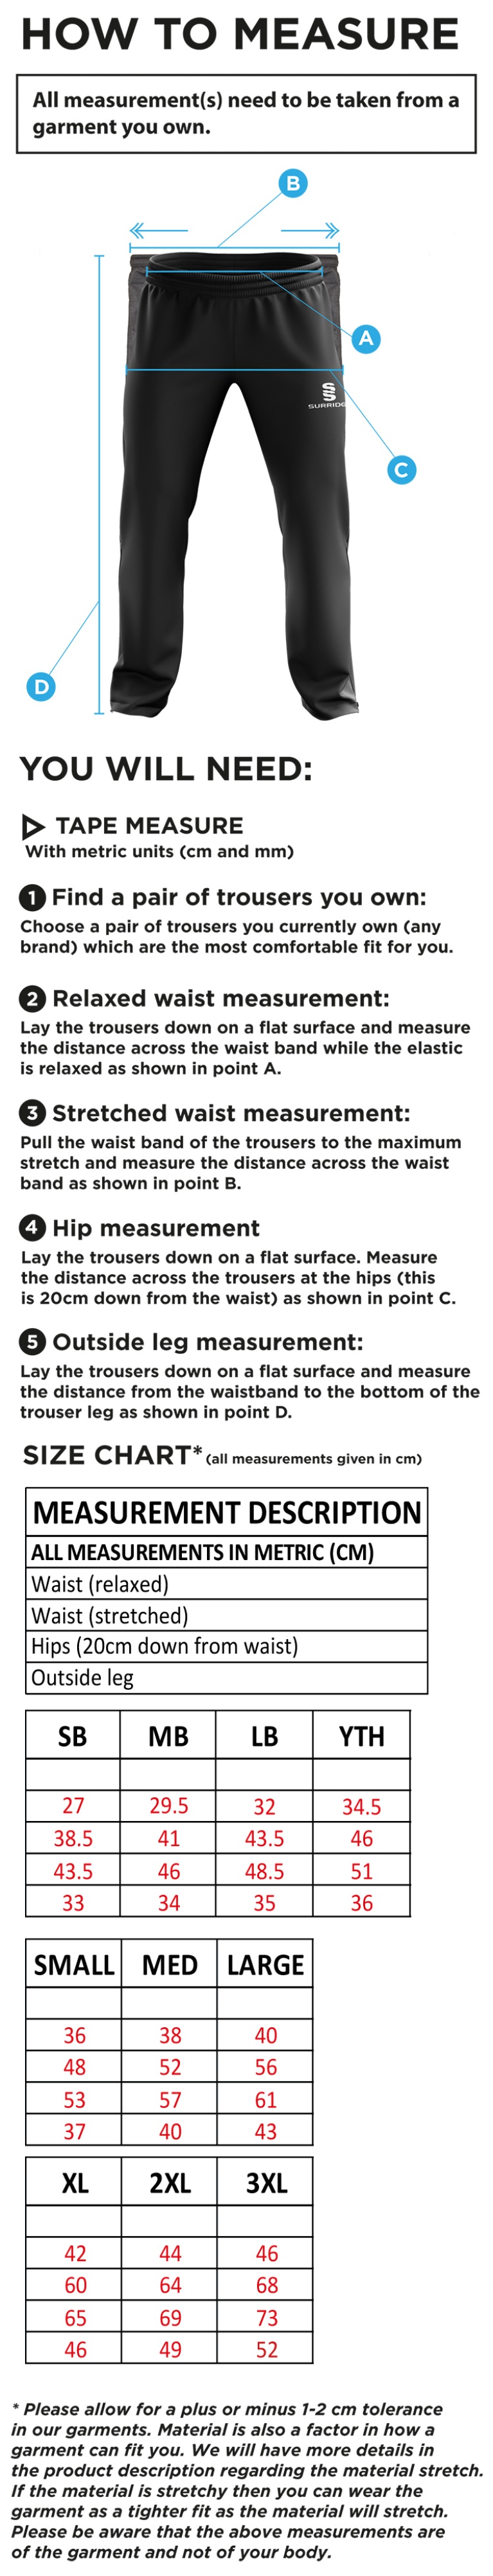 Byfleet CC Ripstop Track Pants - Size Guide